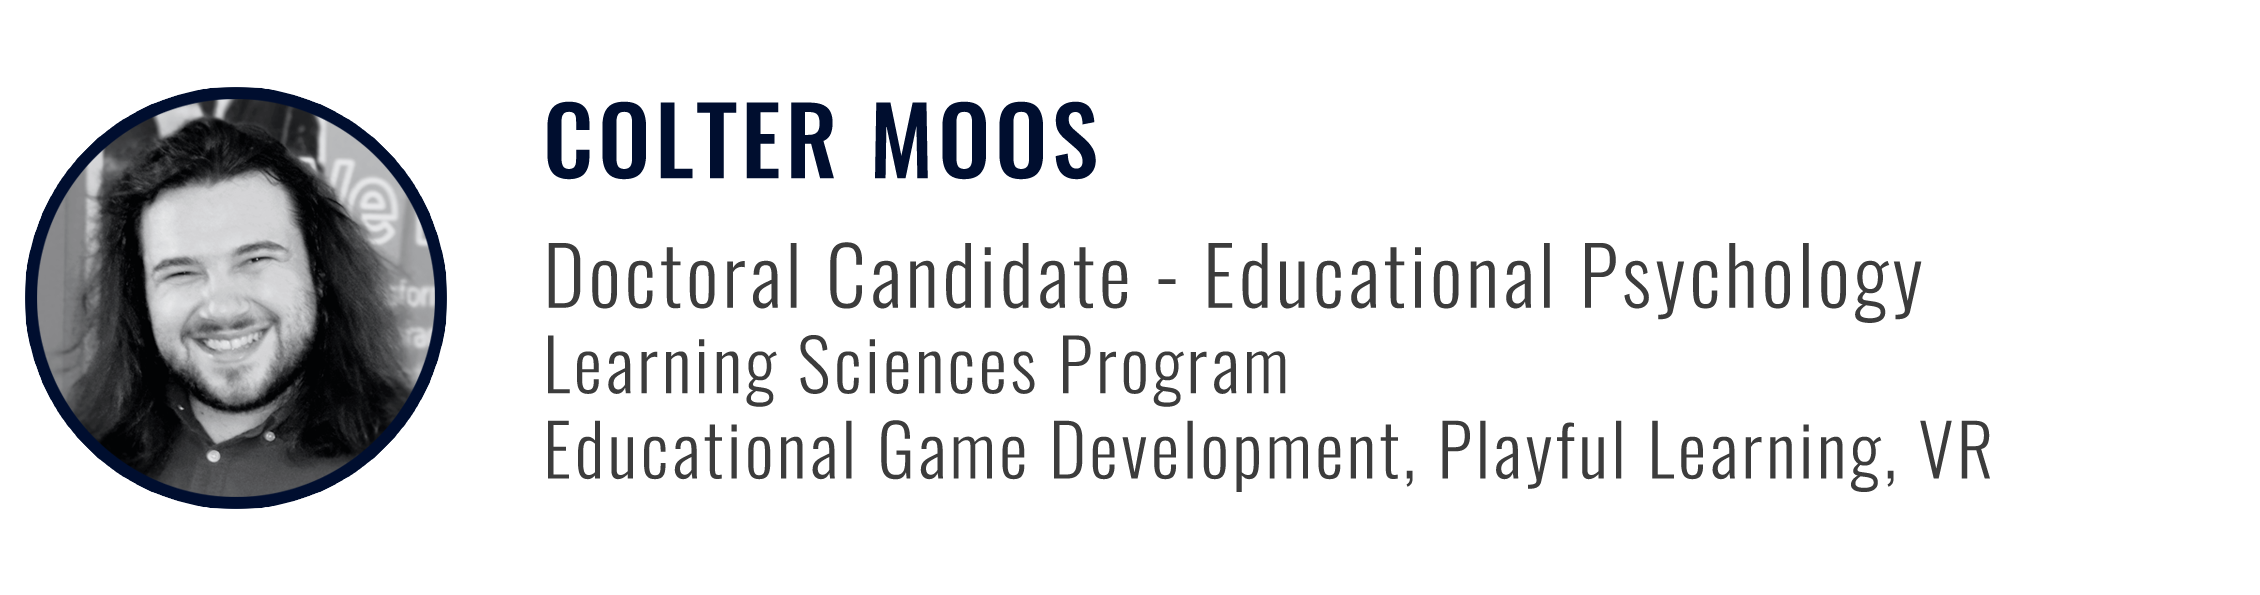 Colter Moos - Doctoral Candidate